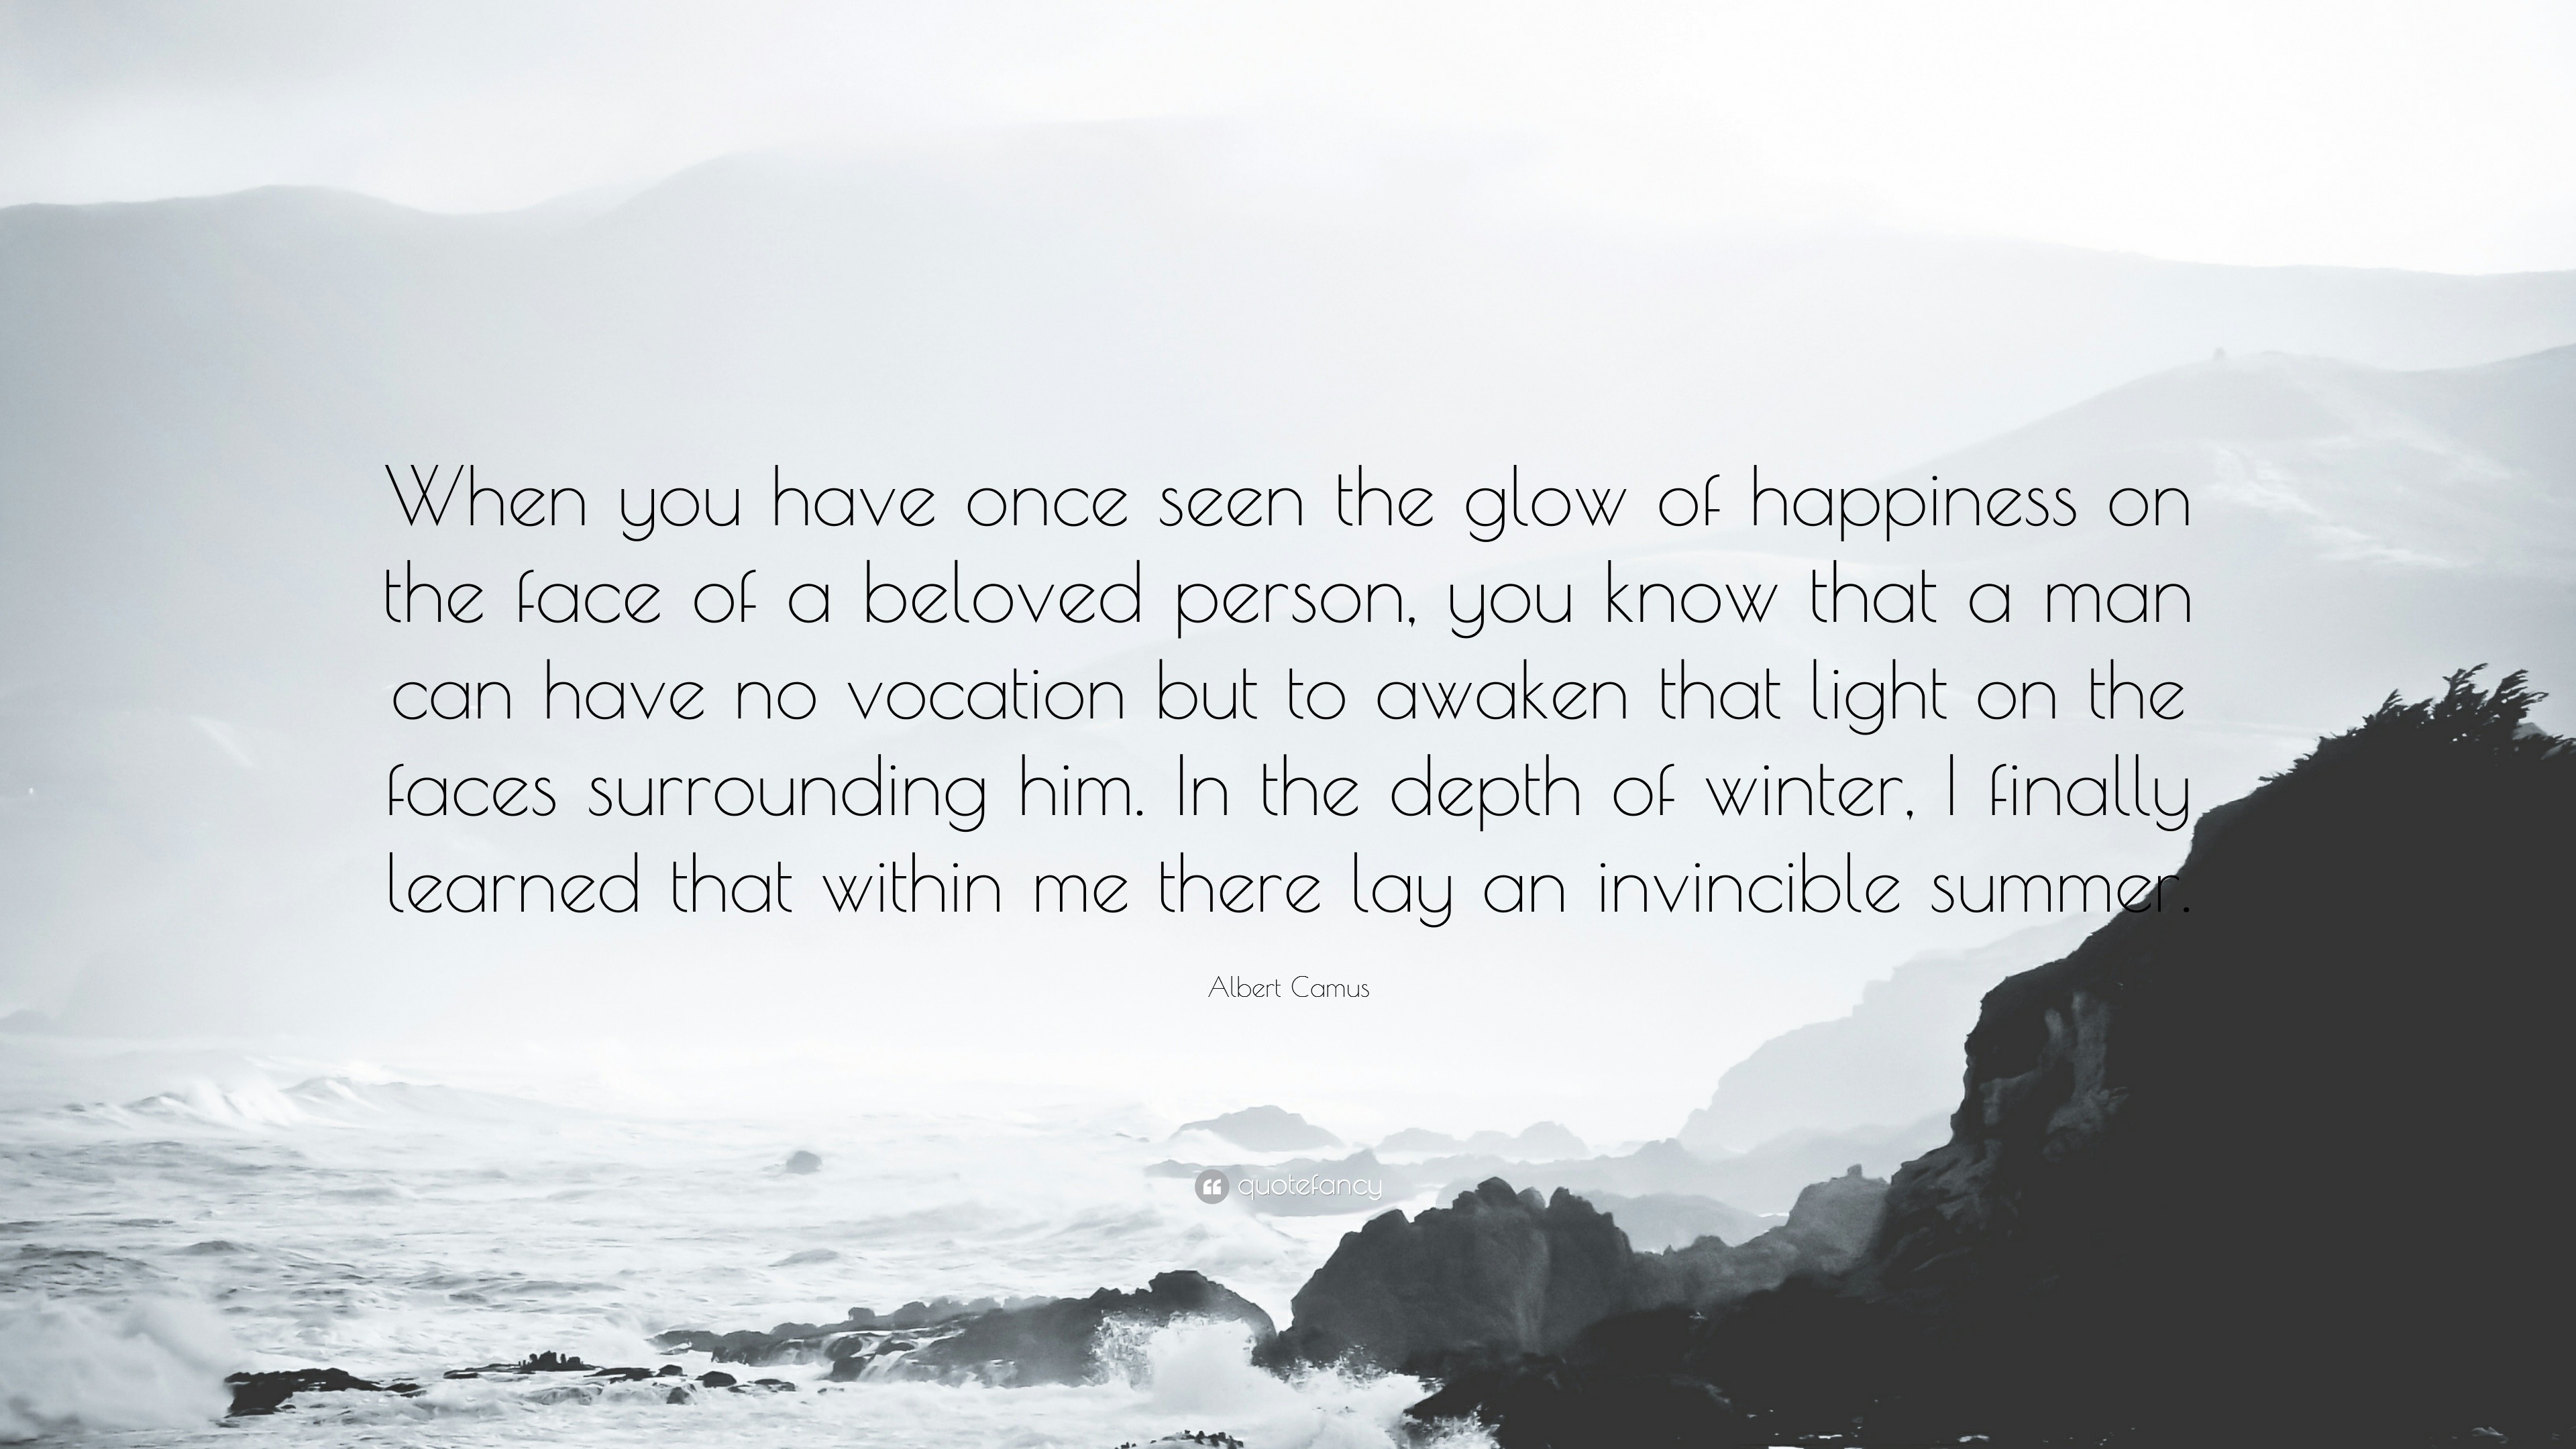 Albert Camus Quote: “When you have once seen the glow of happiness on ...